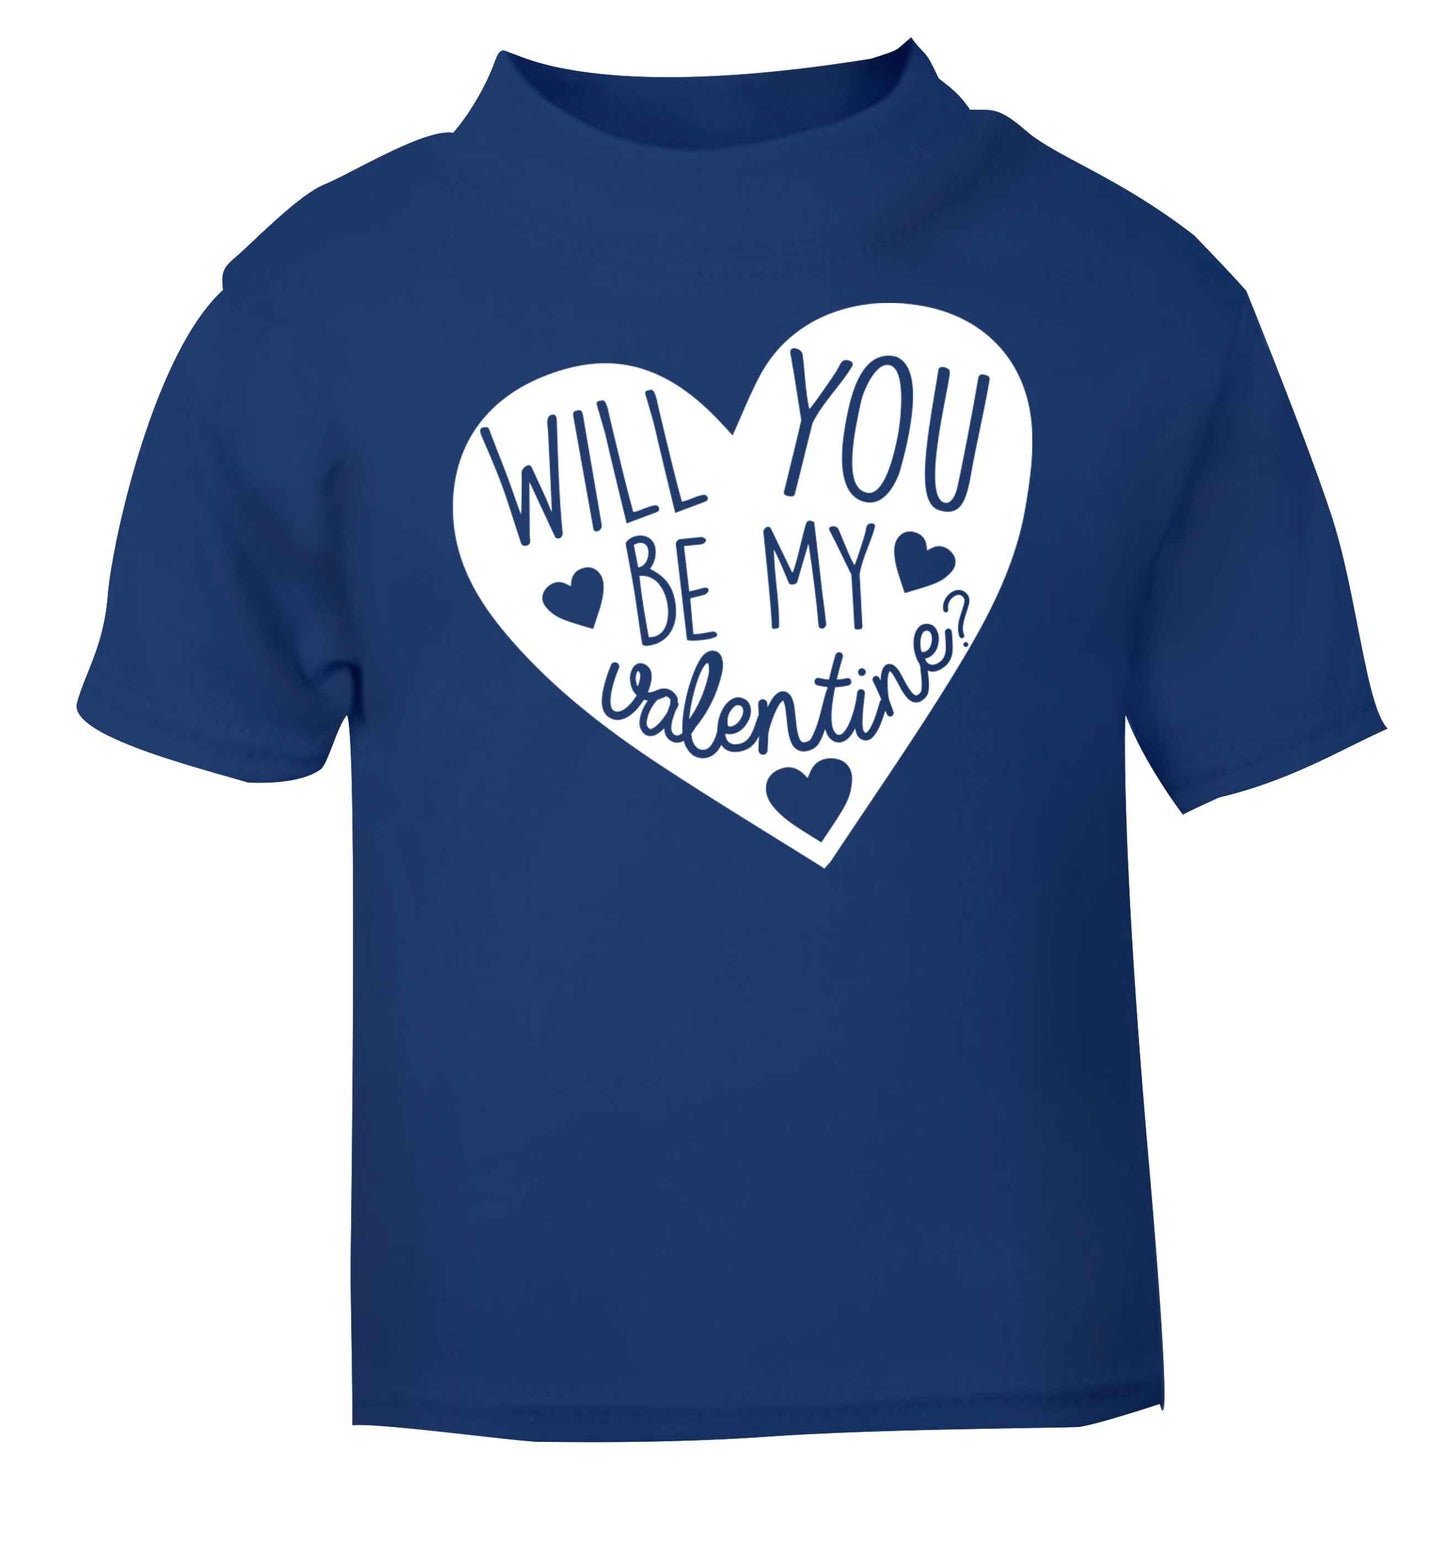 Will you be my valentine? blue baby toddler Tshirt 2 Years